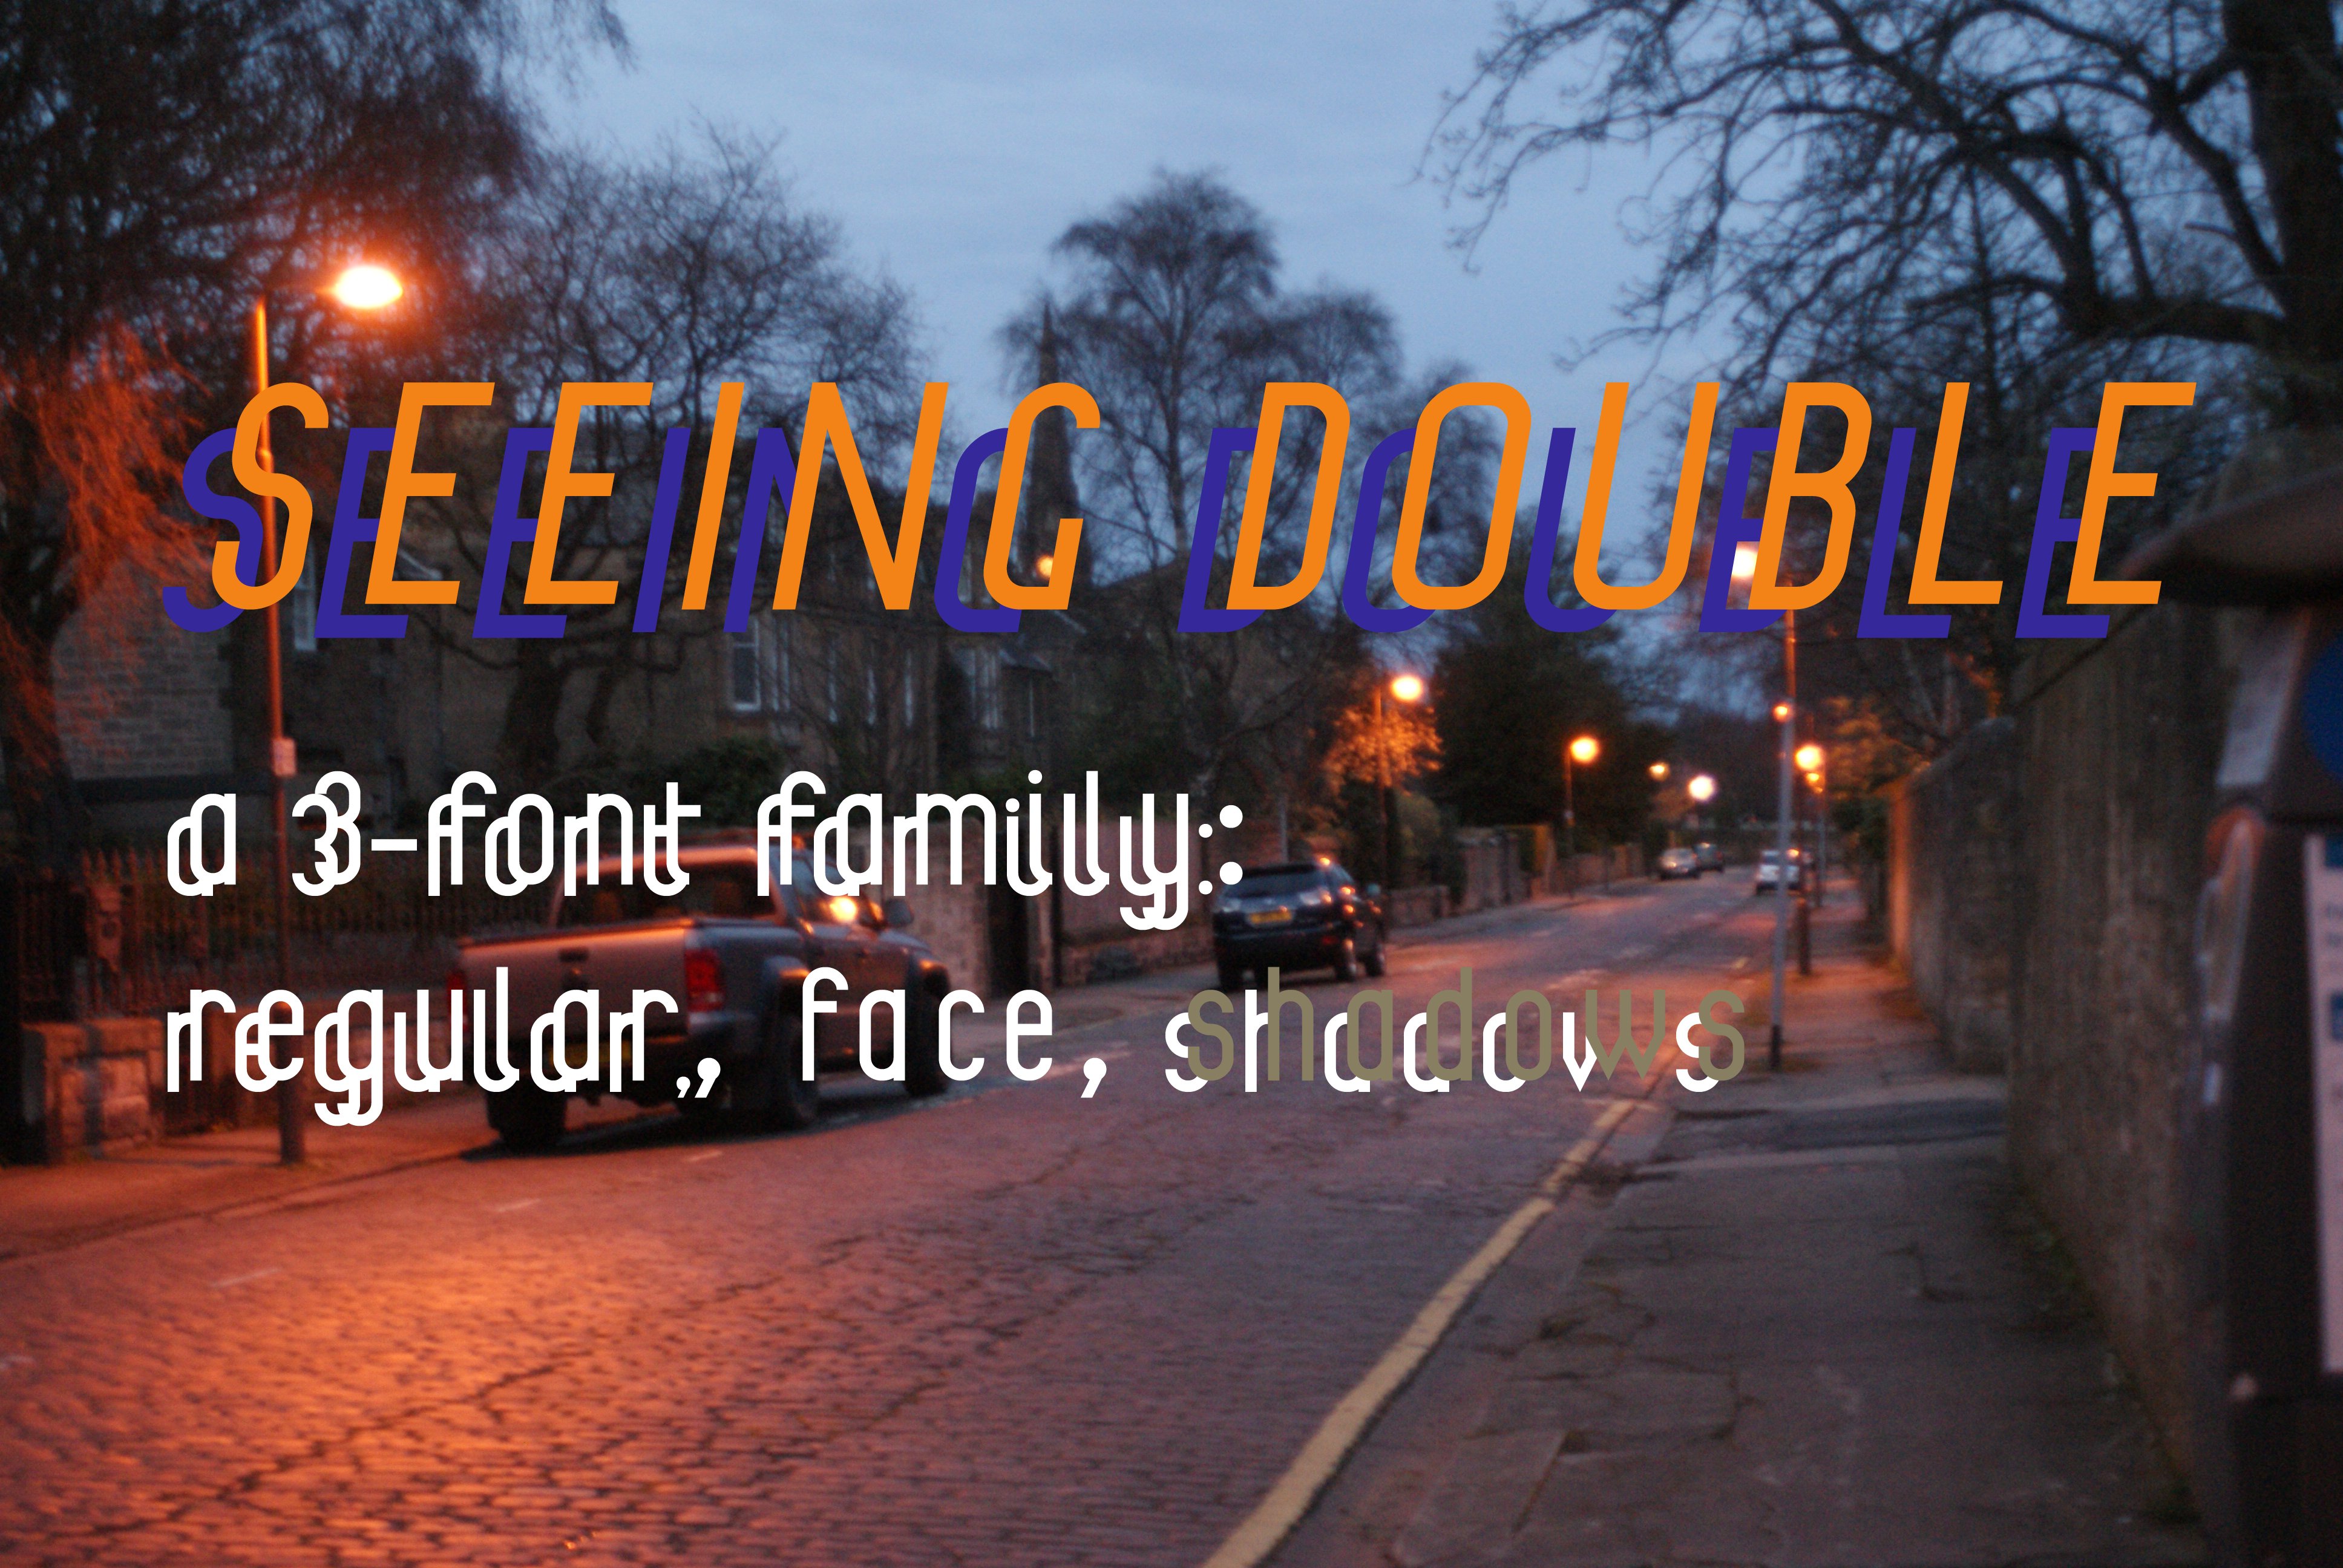 Seeing Double cover image.